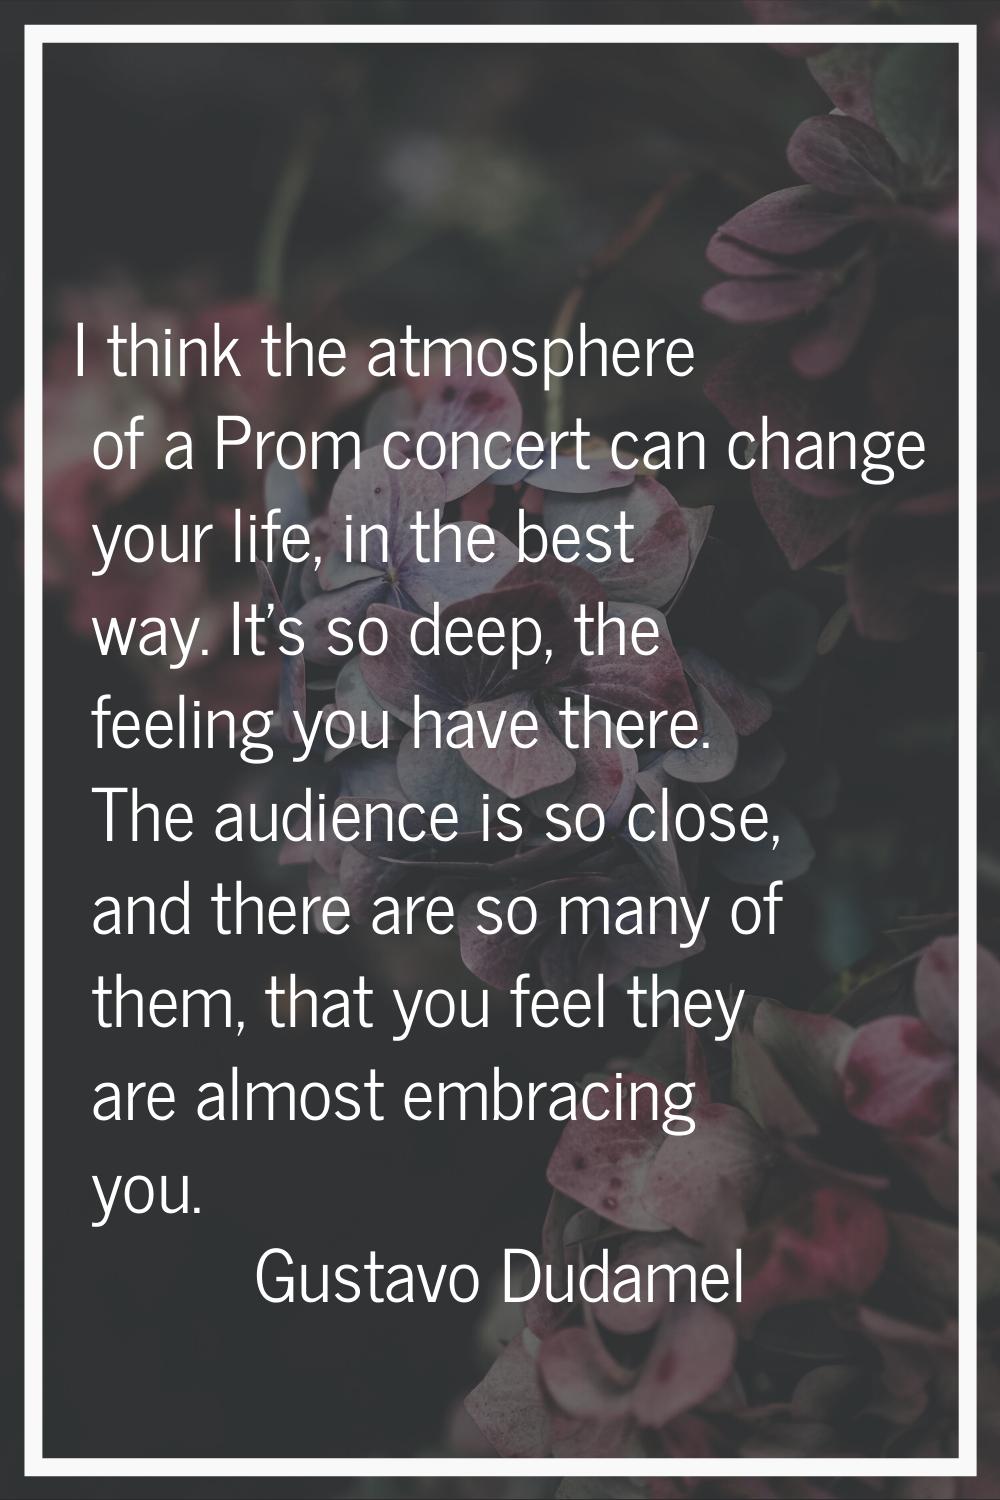 I think the atmosphere of a Prom concert can change your life, in the best way. It's so deep, the f